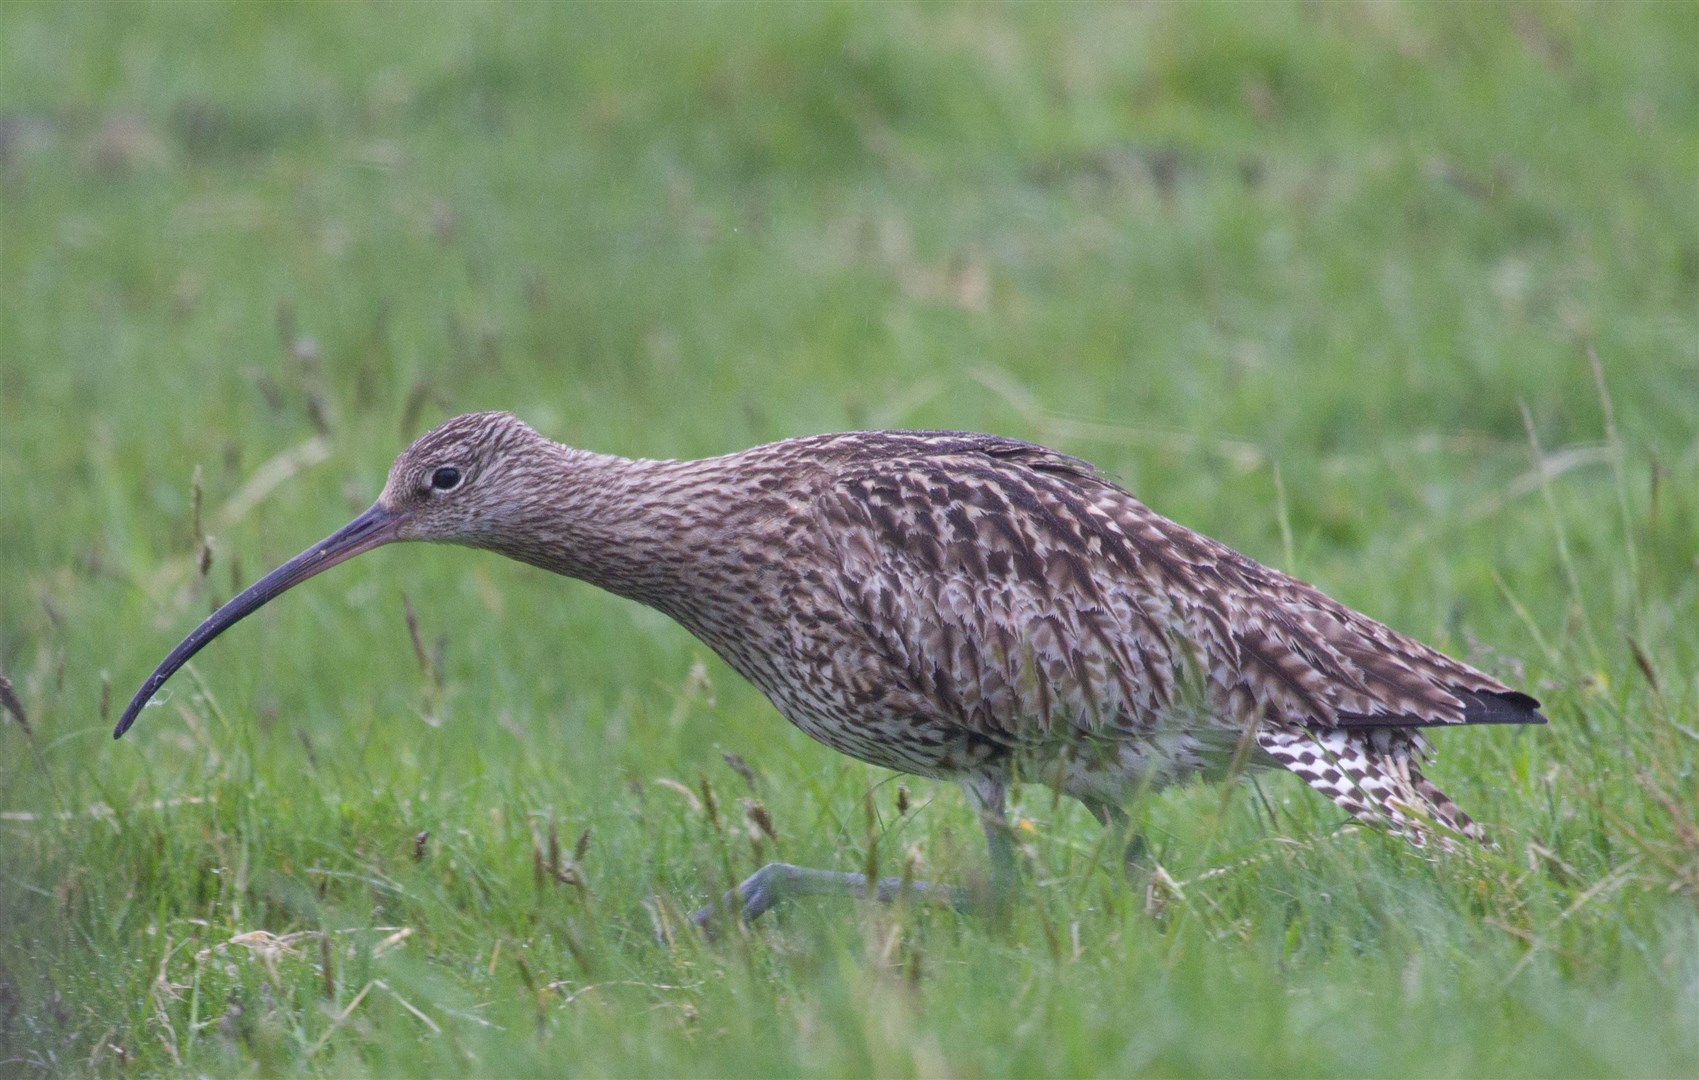 Curlew close up (Ian Francis)